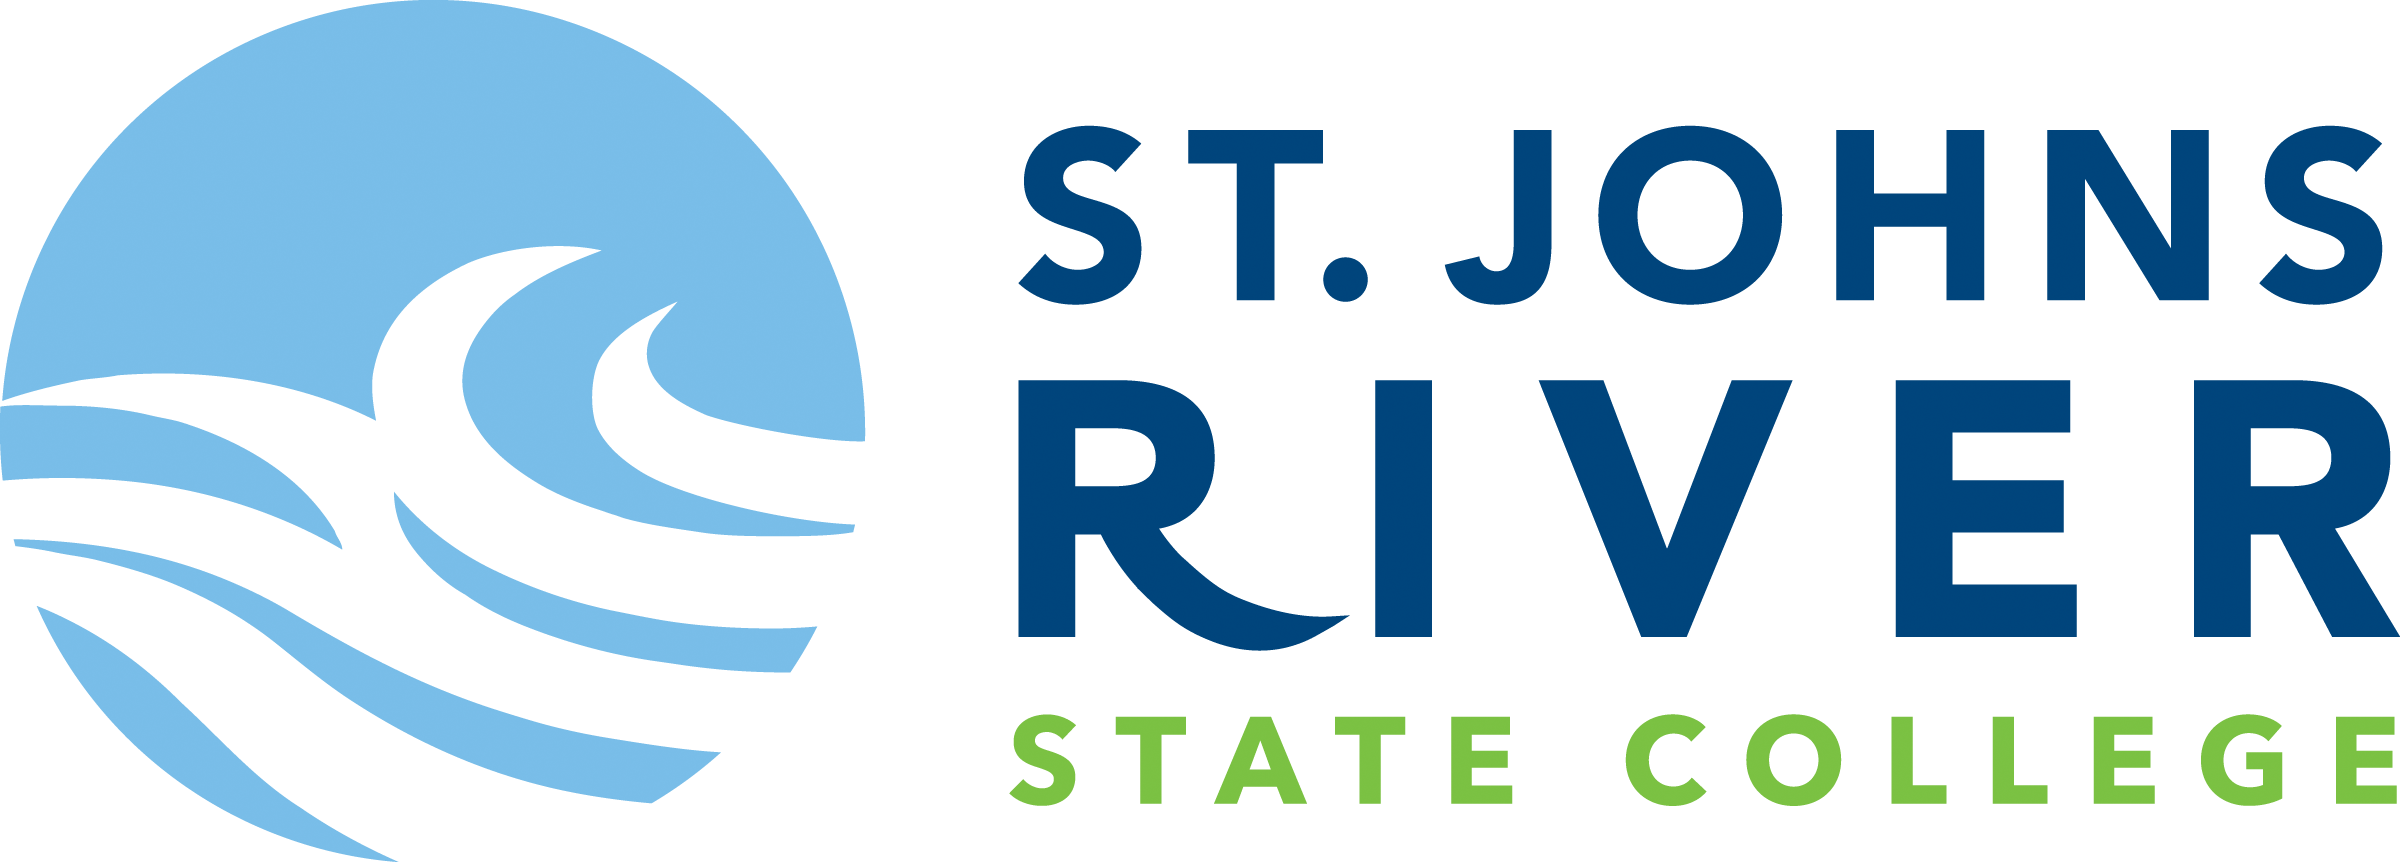 St. Johns River State College Logo